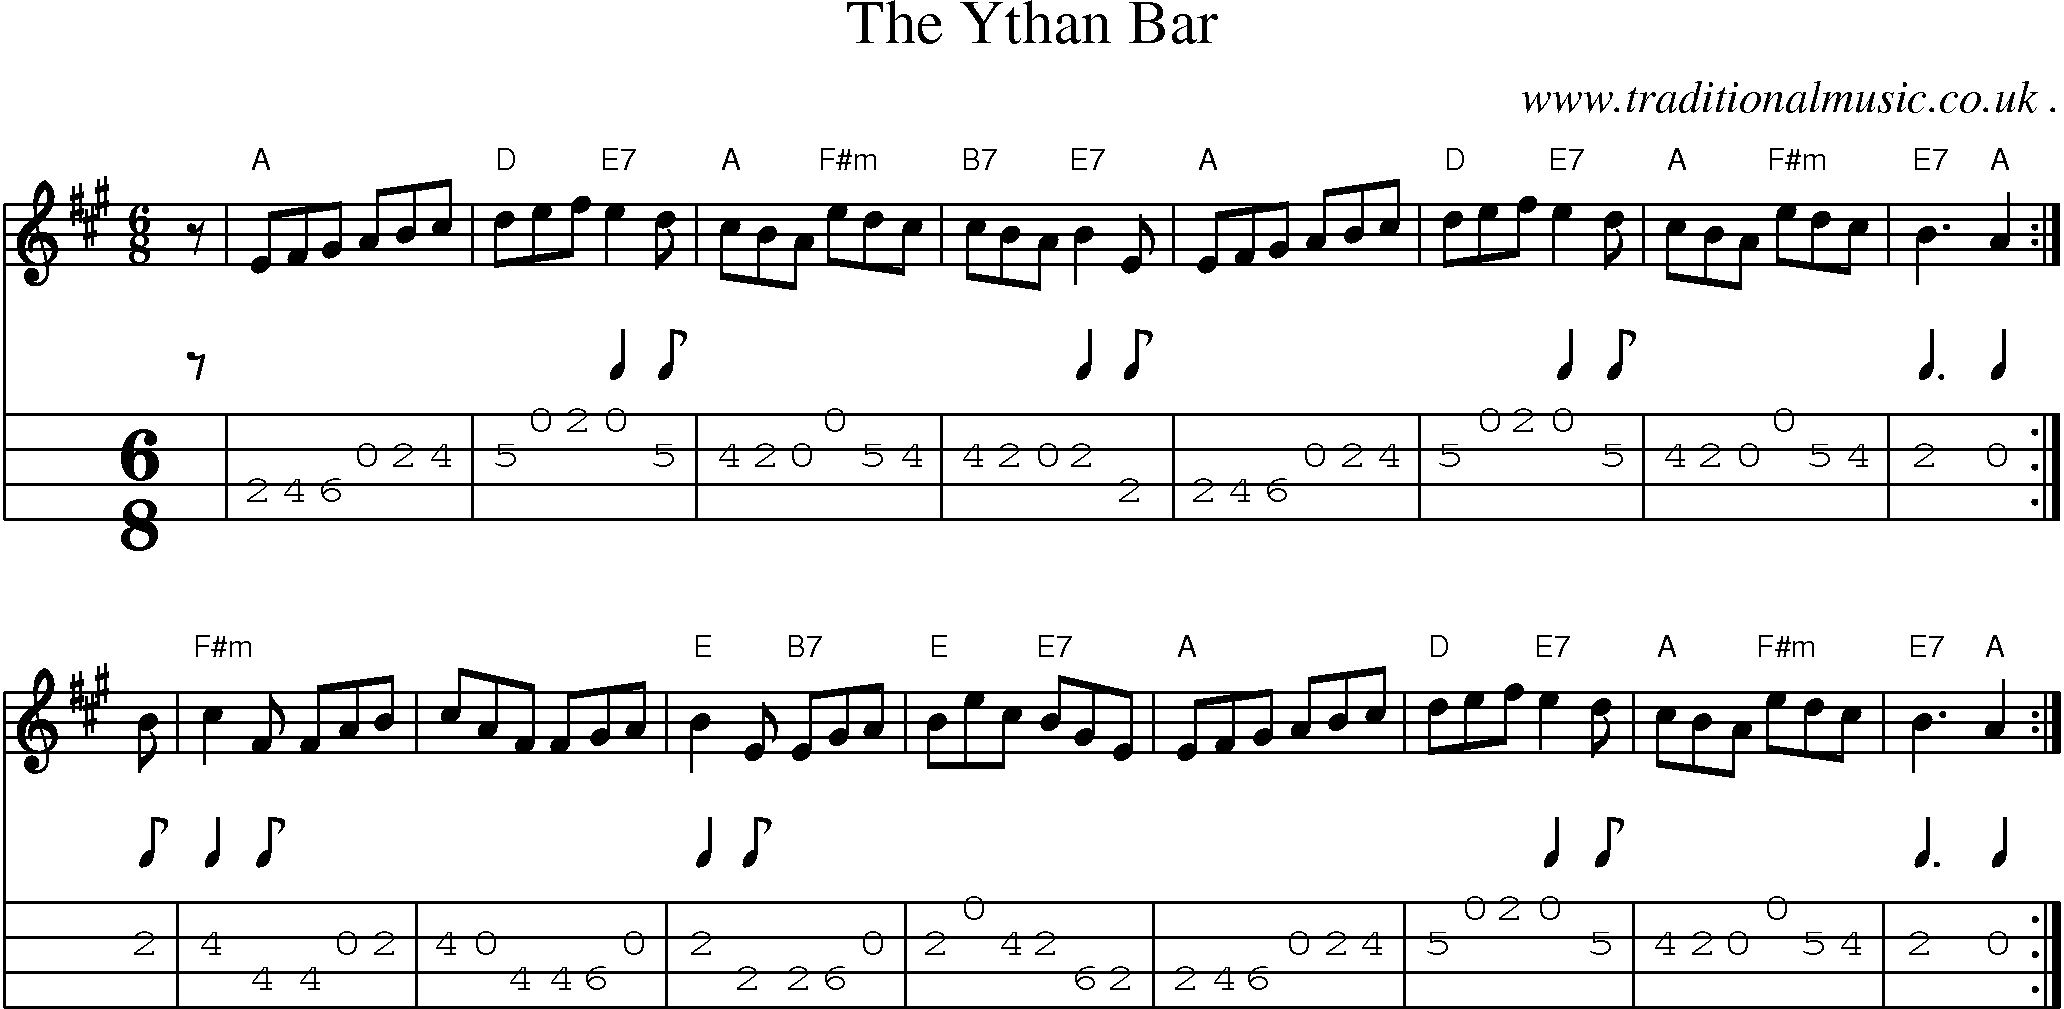 Sheet-music  score, Chords and Mandolin Tabs for The Ythan Bar